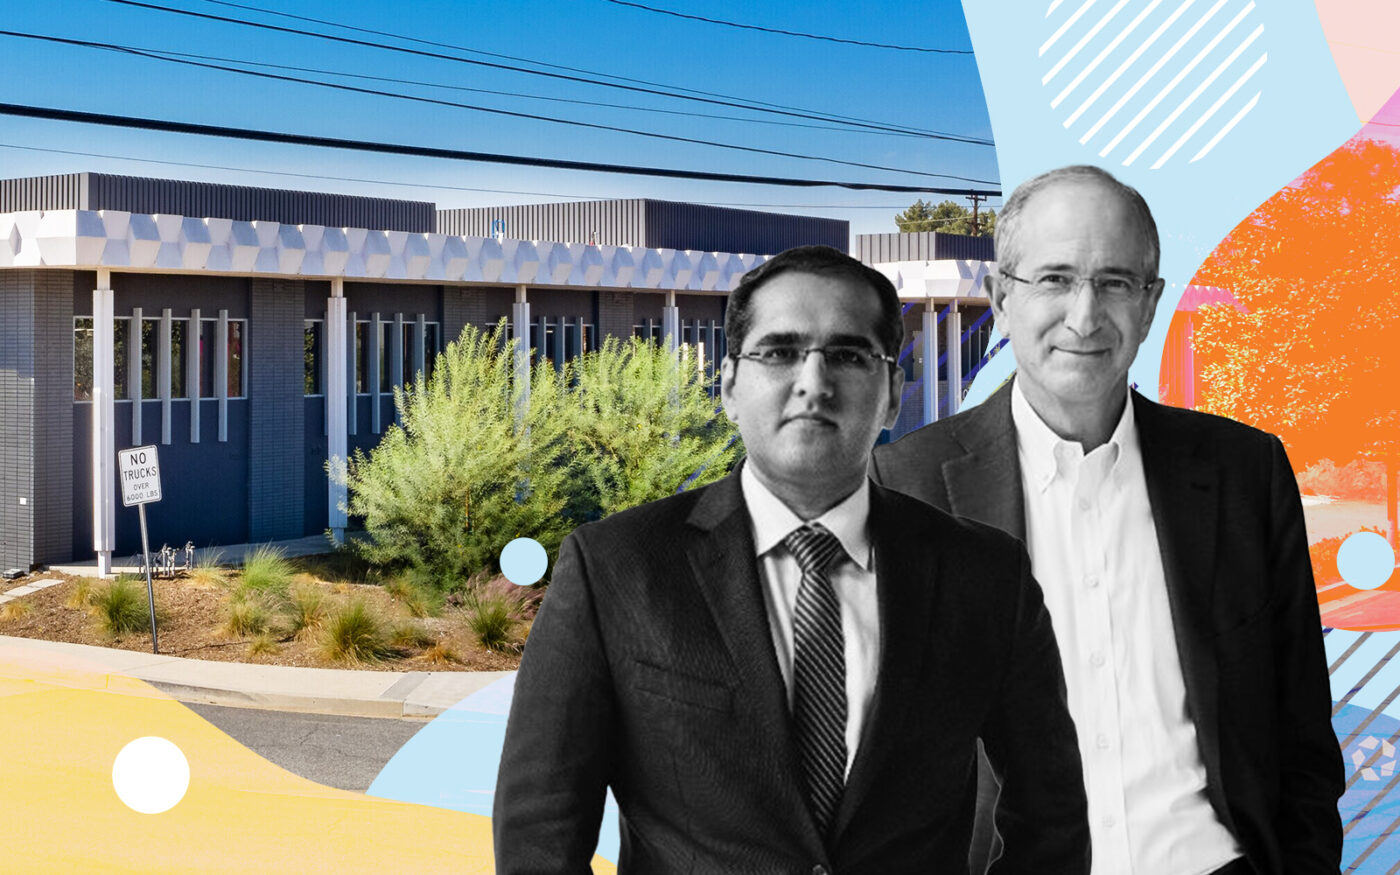 Tata Communications' Dhaval Ponda and Comcasts' Brian Roberts with 1840 Victory Boulevard, Glendale